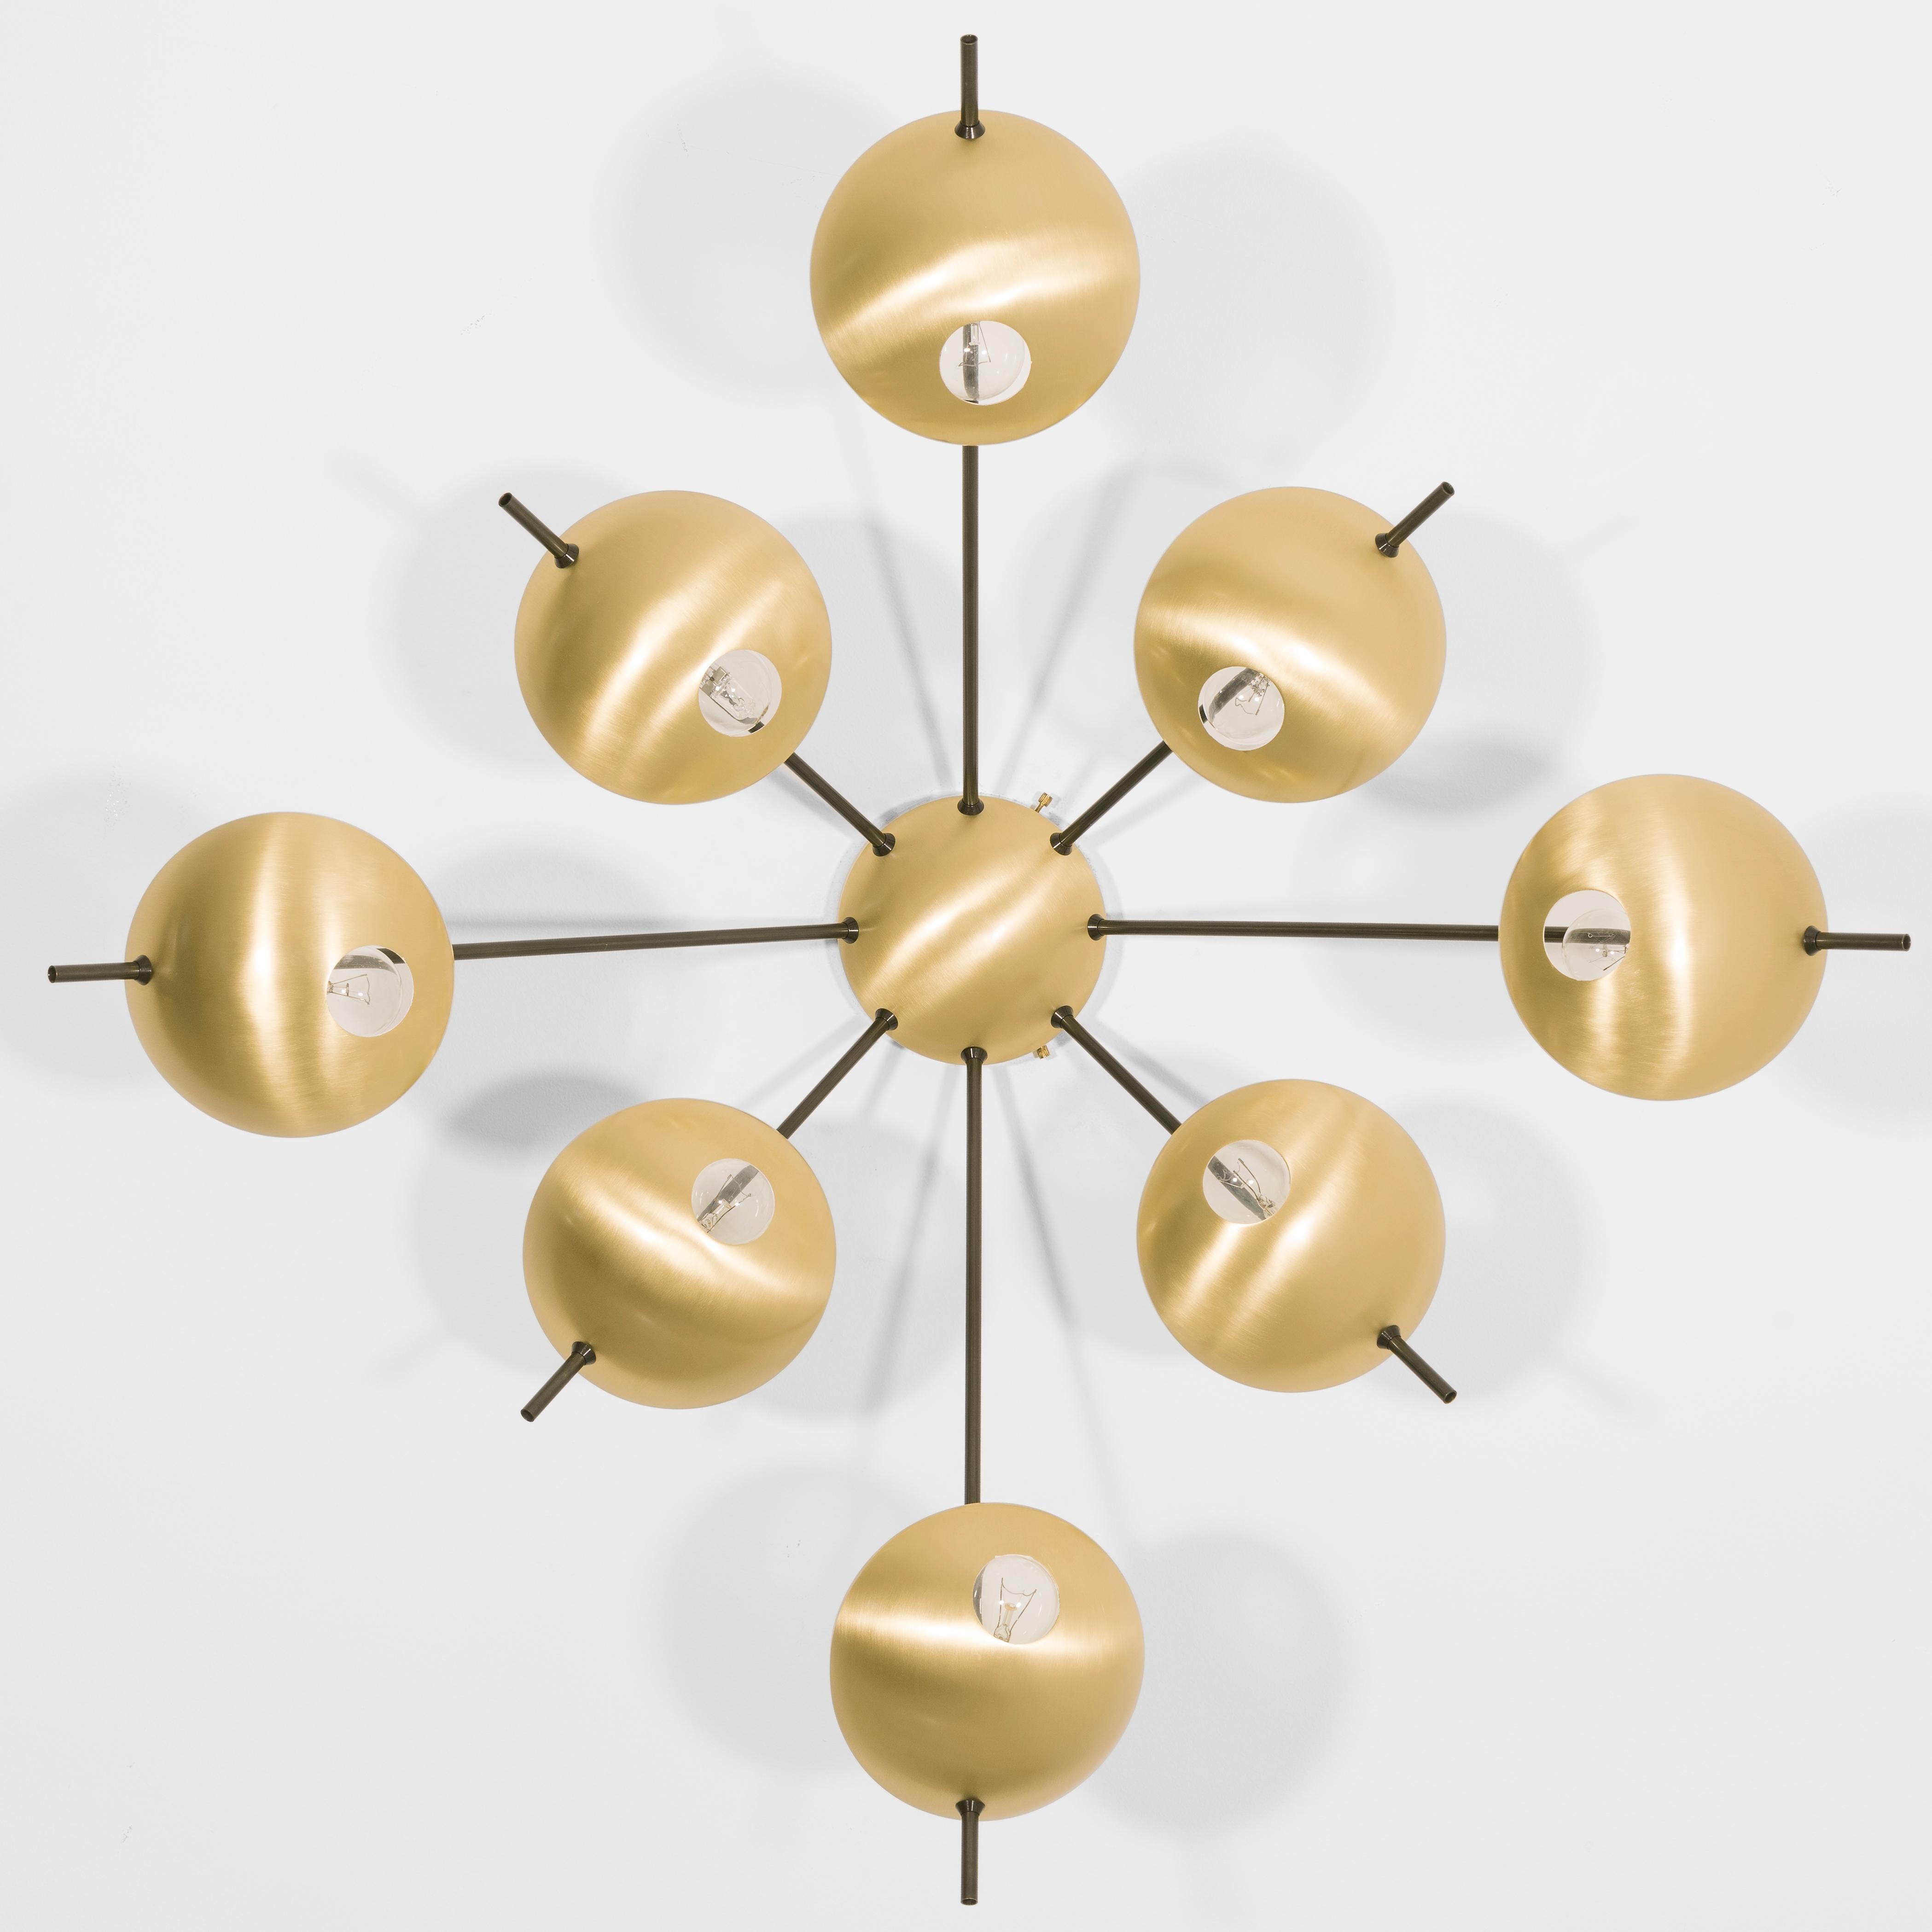 Octo II pendant by Design for Macha
Materials: Brass
Dimensions: W 100 x D 100 x H 42 cm

The Helios lighting collection is a tribute to antic sundial. Helios is both simple and very decorative, it will bring undisputed warmth and character to